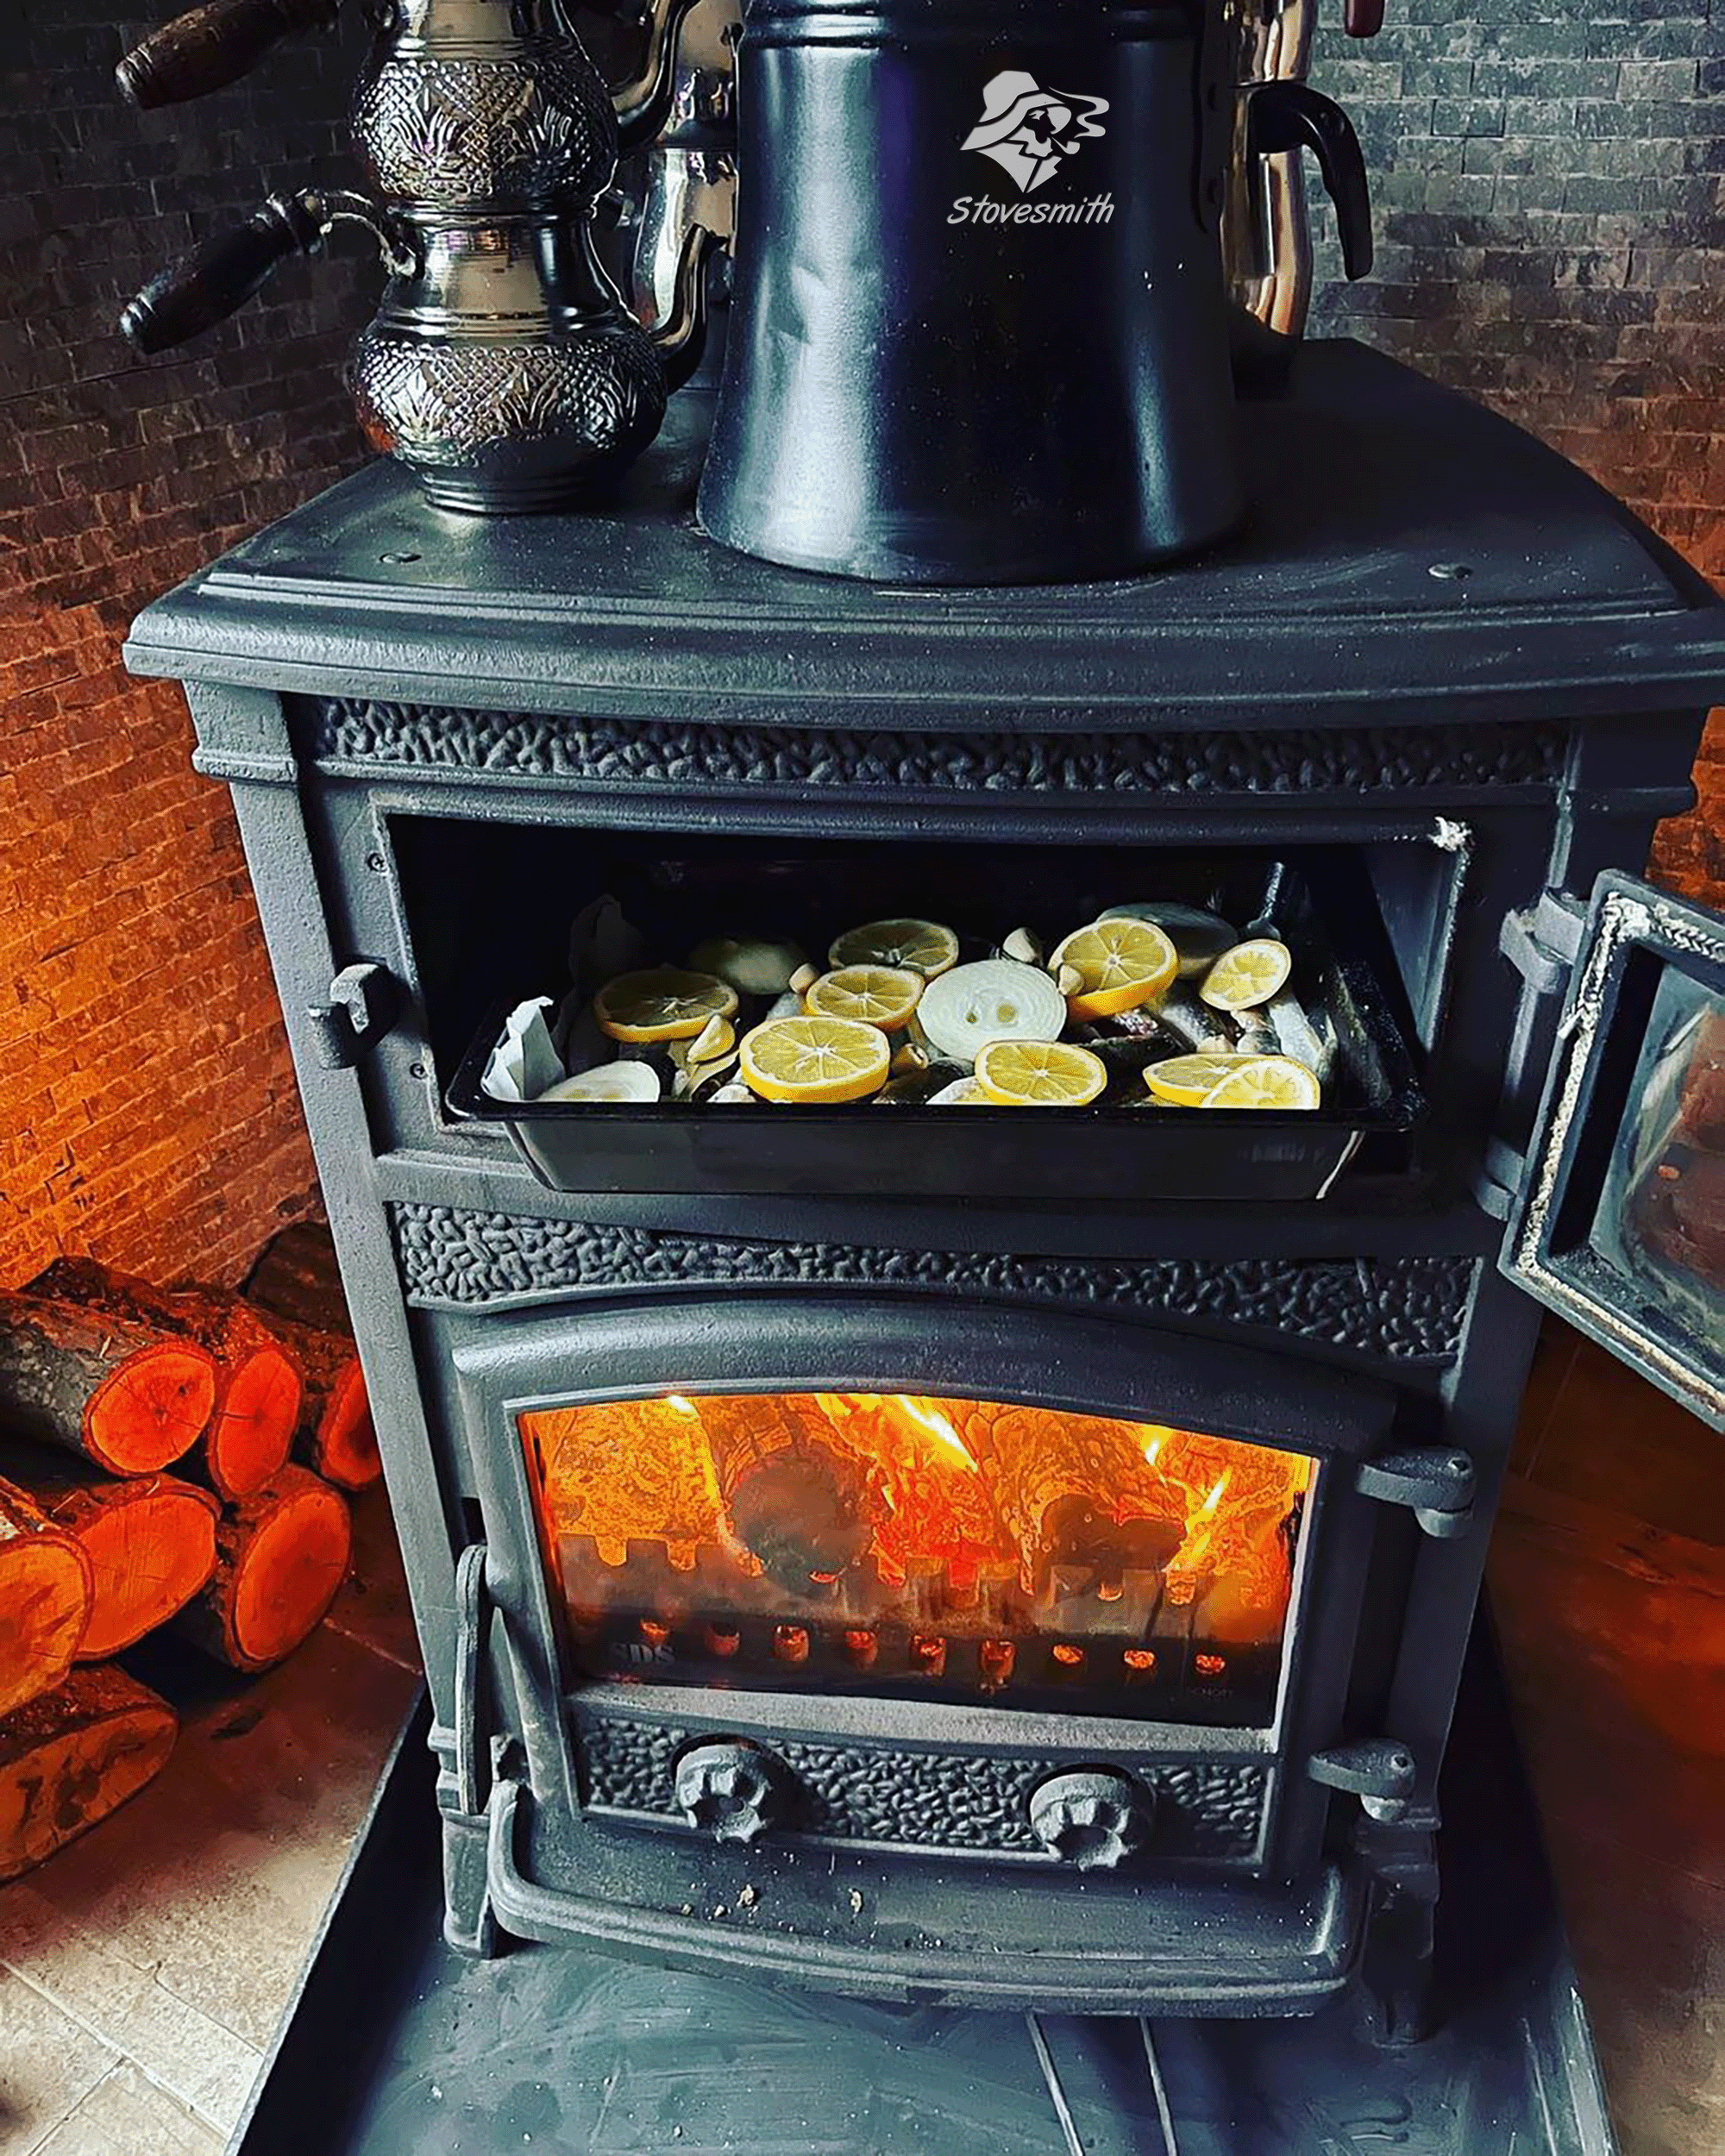  Cast Iron Stove with Oven, Cast Iron Fireplace, Baking Stove  Cooker Stove Warming Stove, Tiny House Stove Cabin Stove